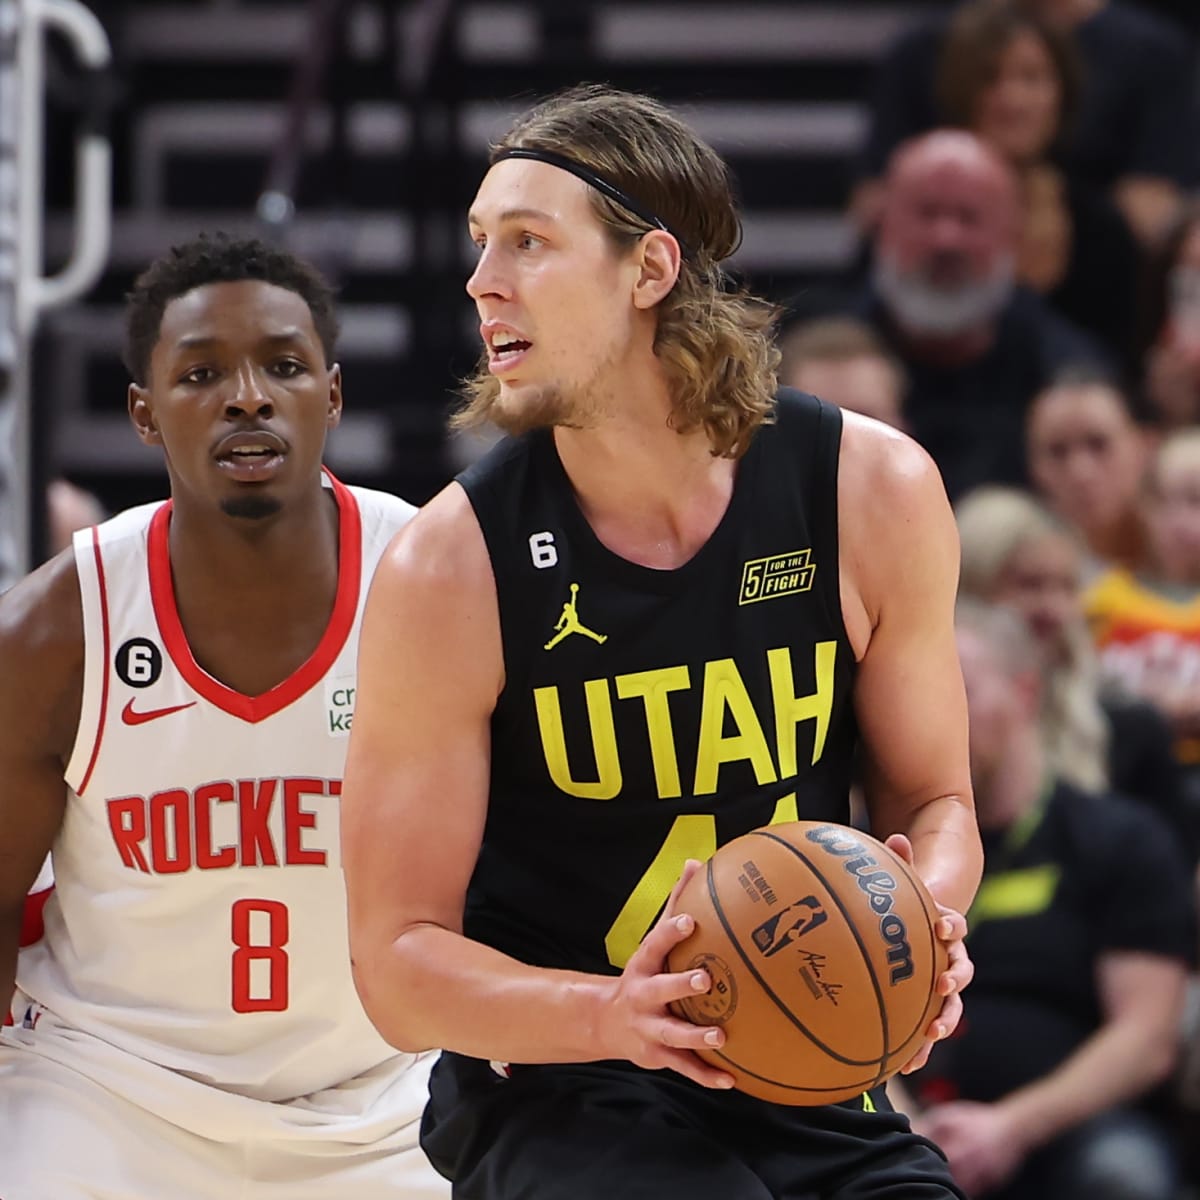 Kelly Olynyk stepping up as mentor for Rockets